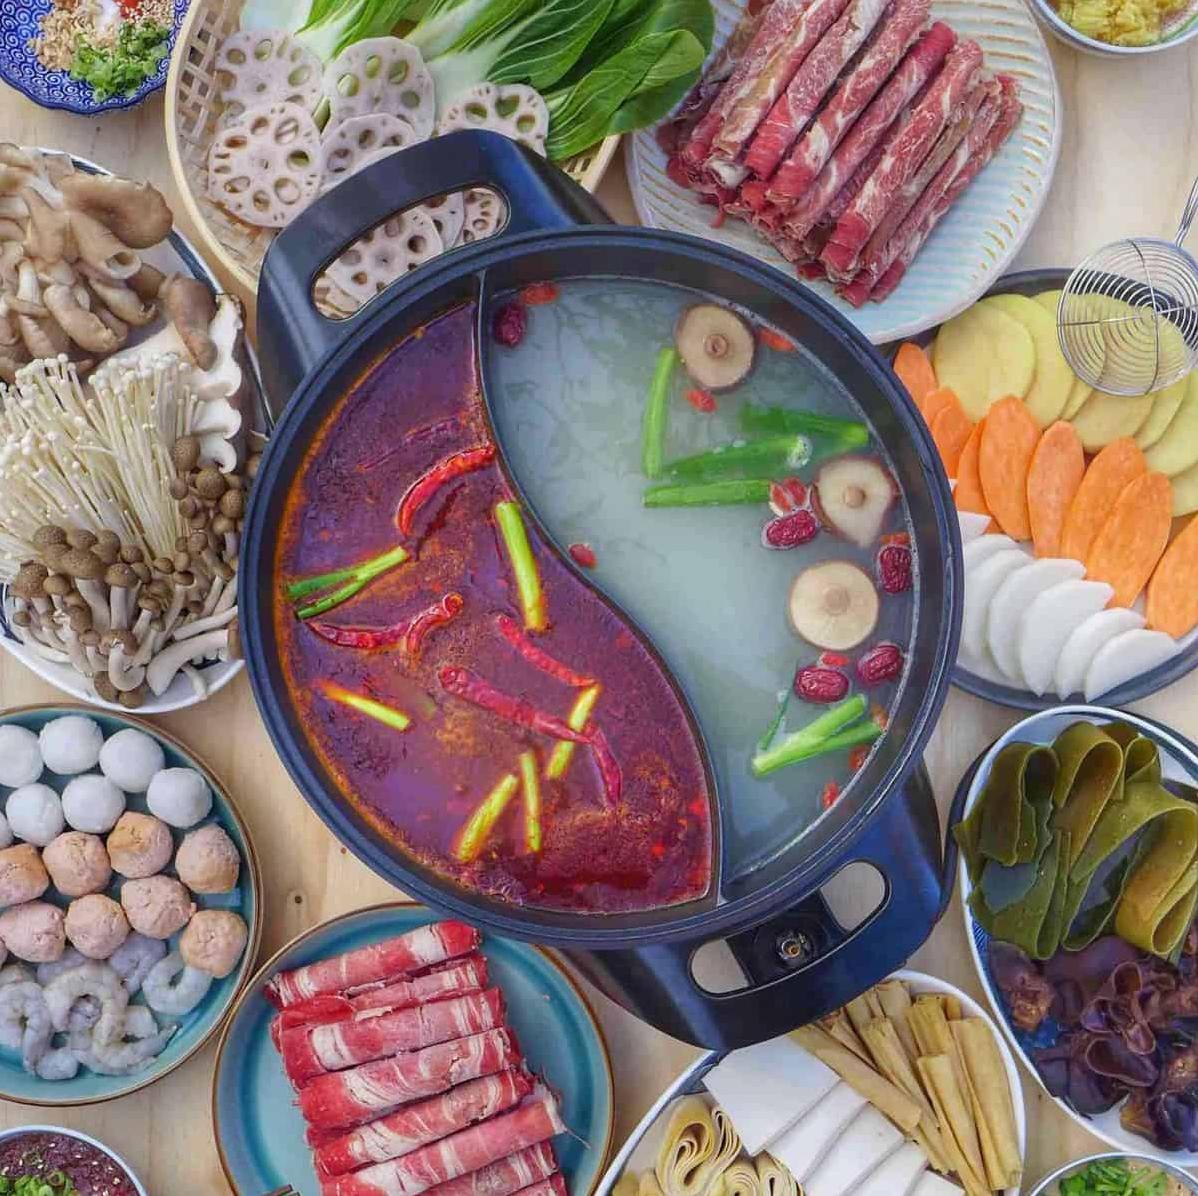  Get ready for a steaming duet of flavors - this is no ordinary hot pot!